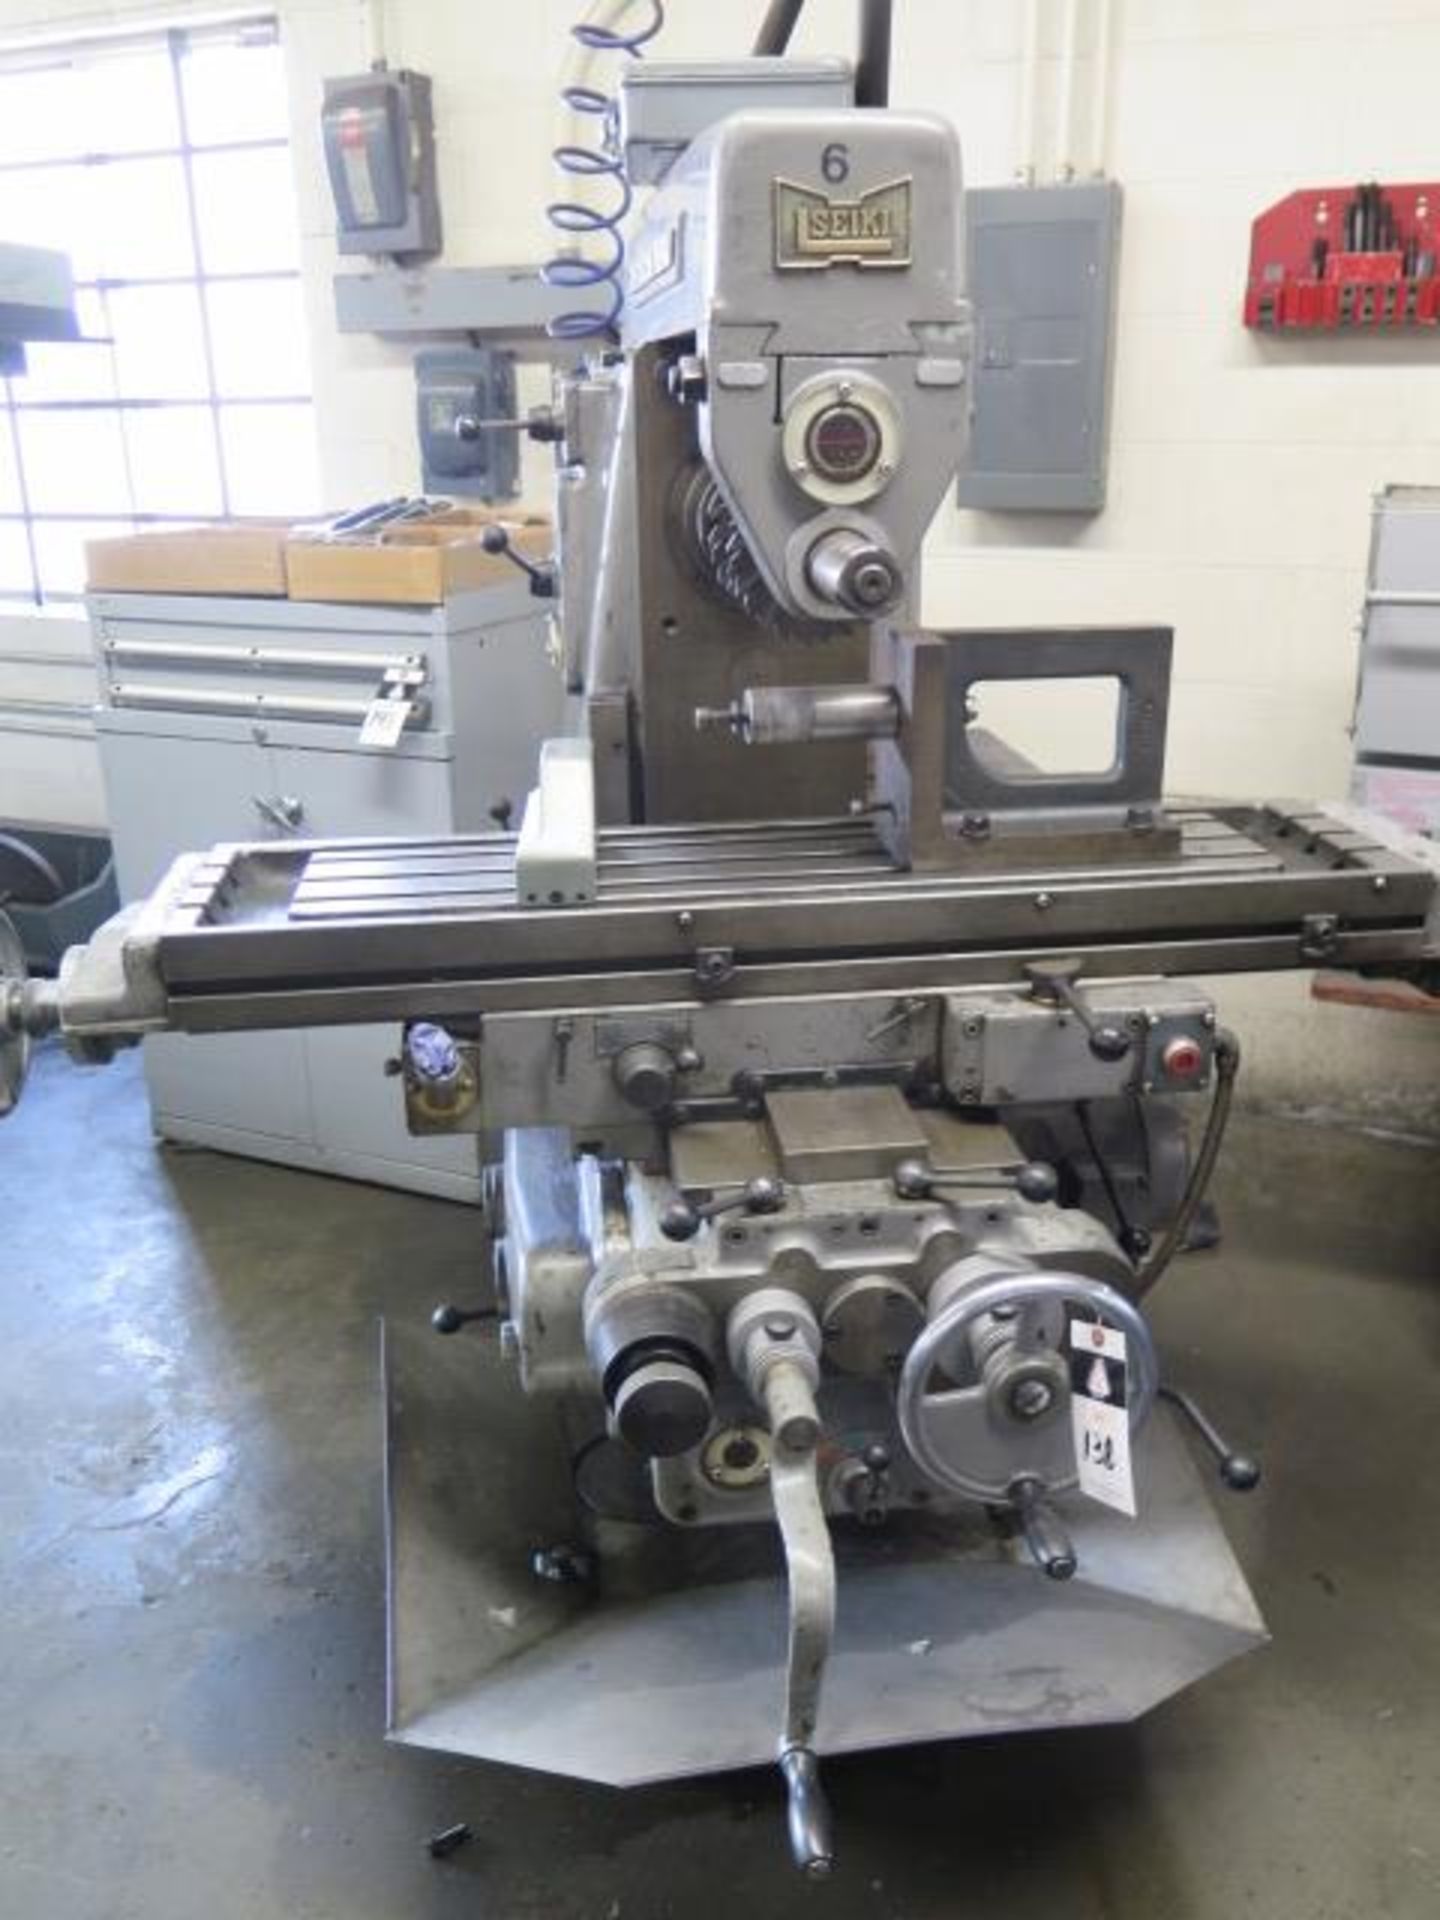 Hitachi Seiki MS-P Horiz Mill s/n N-5075 w/ 60-1800 RPM, 50-Taper Spindle, Power Feeds, SOLD AS IS